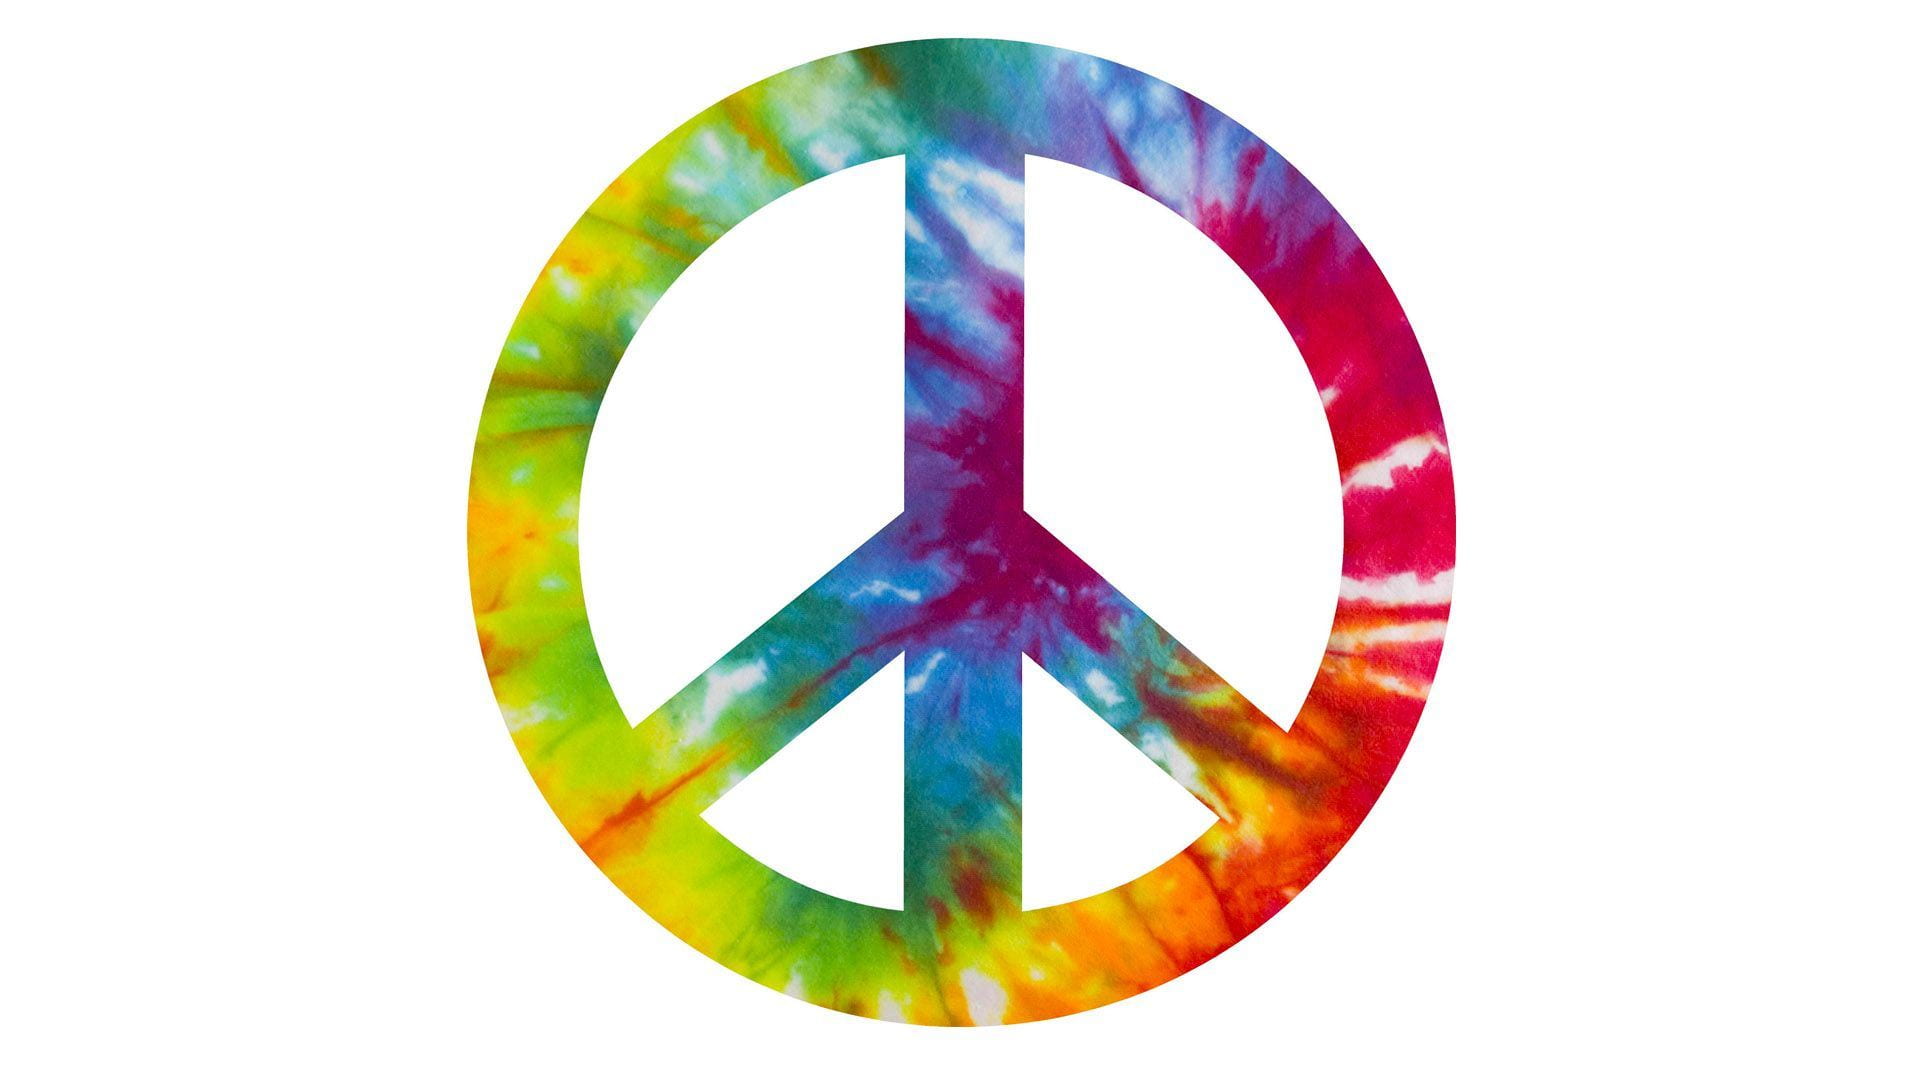 An image of the Peace sign